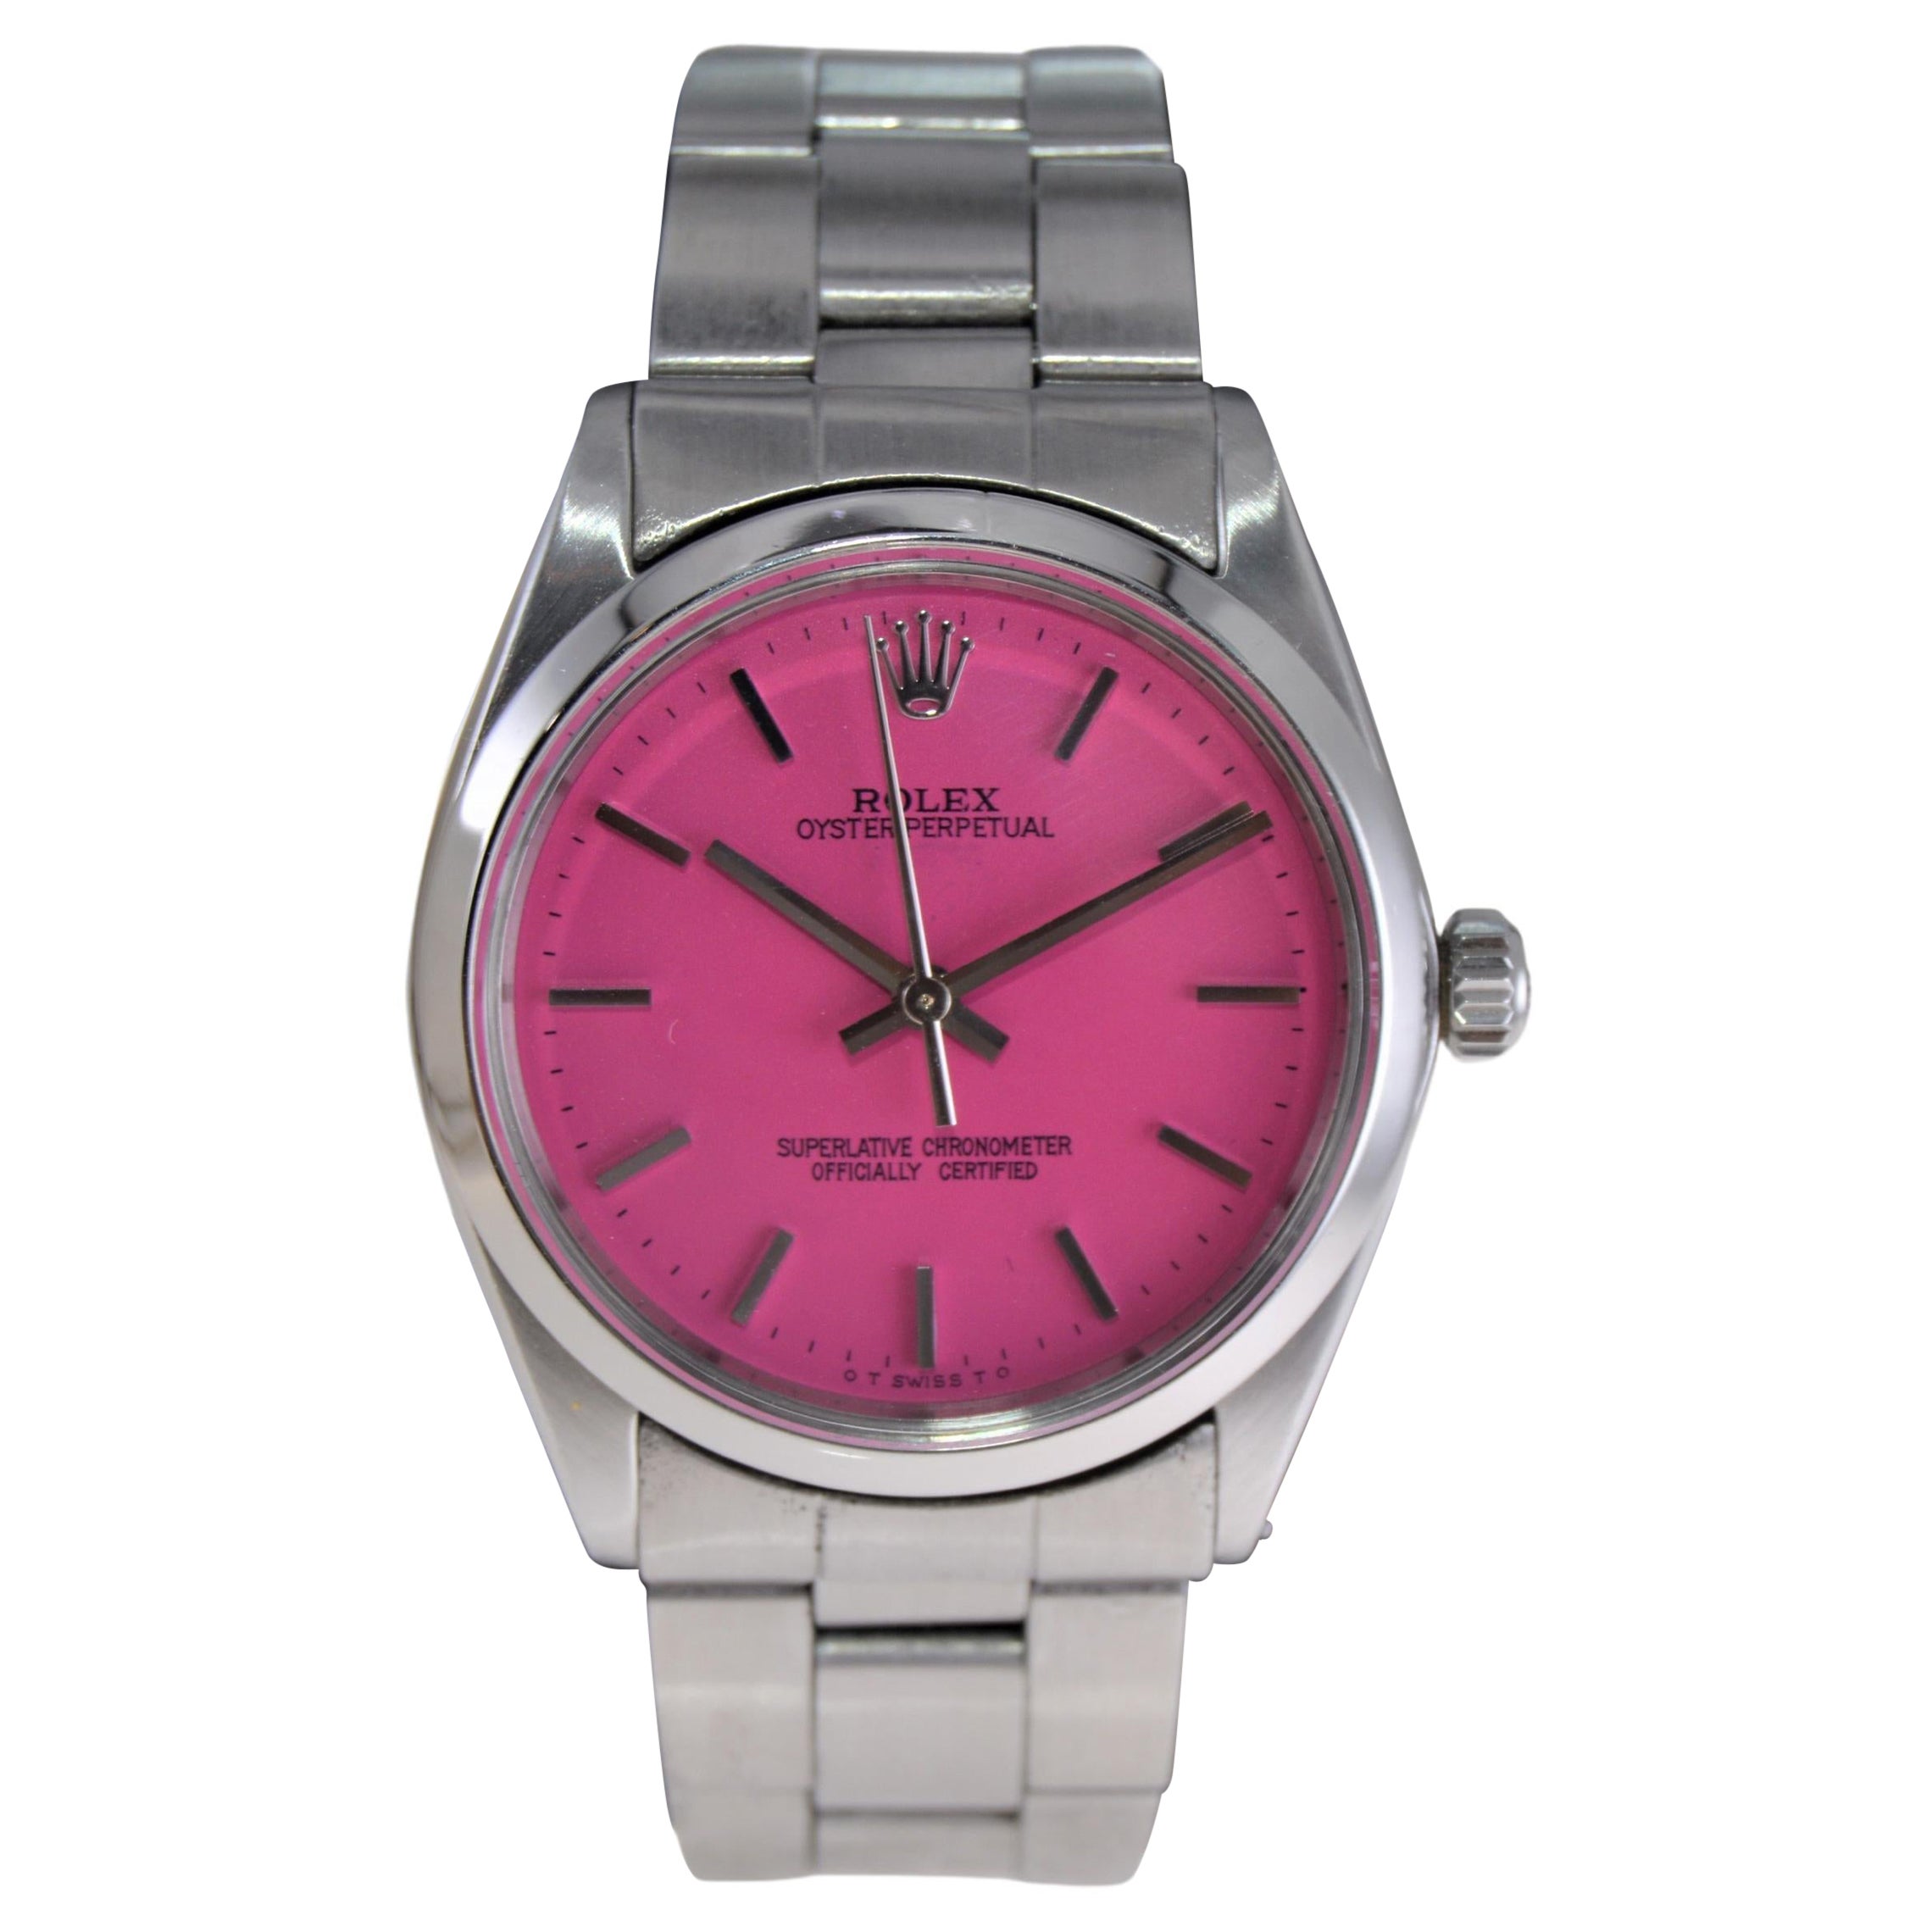 Rolex Stainless Steel Oyster Perpetual with Custom Hot Pink Dial, 1960s